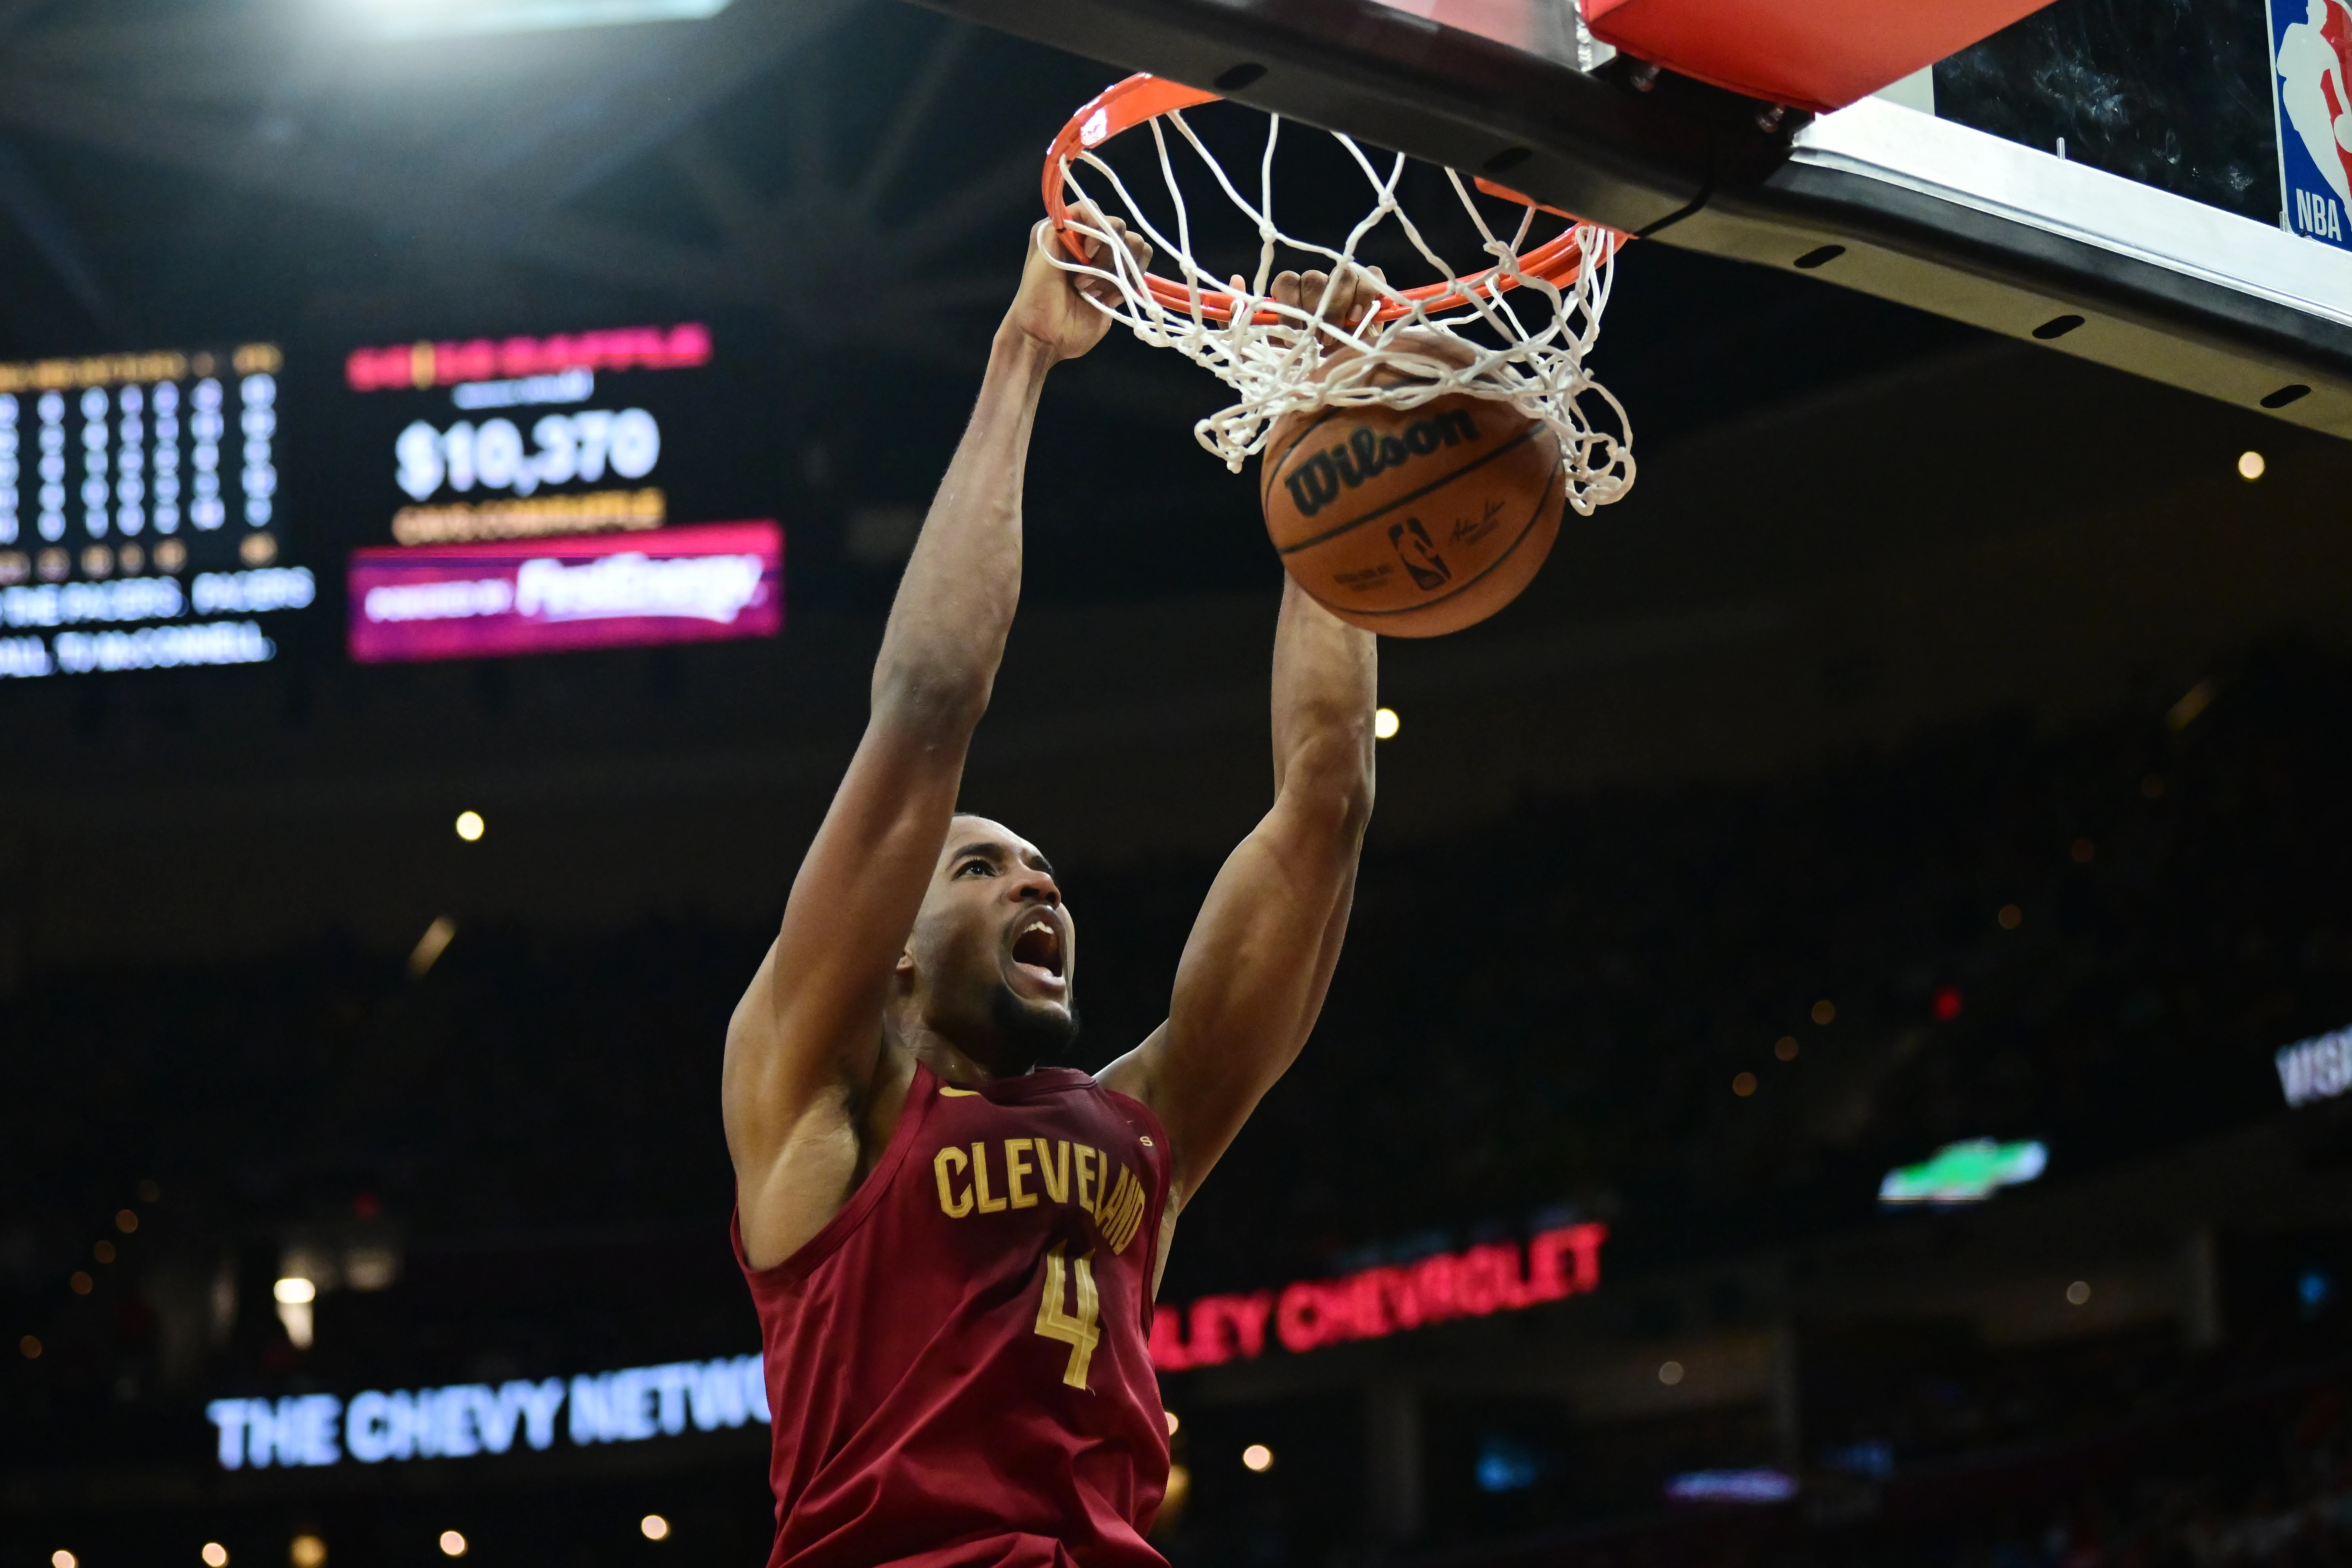 Cavs address shooting, toughness after last season's playoff disappointment